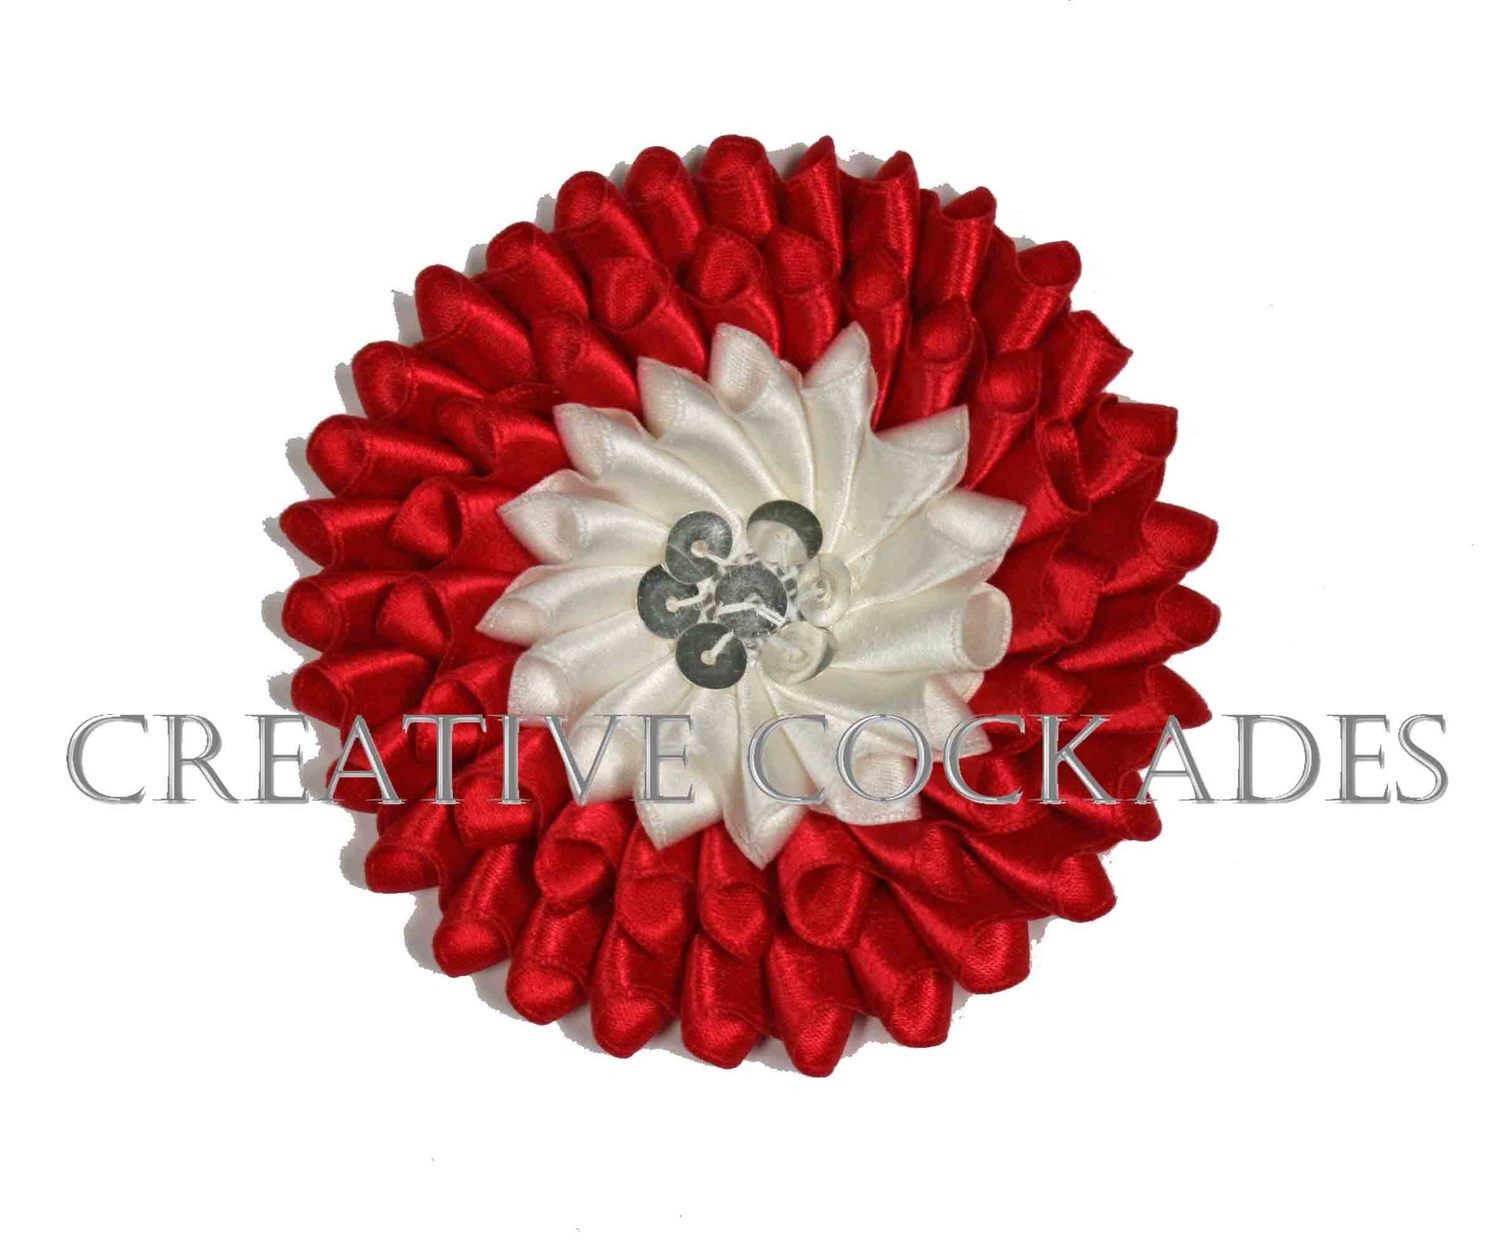 Red and White Silk Secession Cockade with Spangles